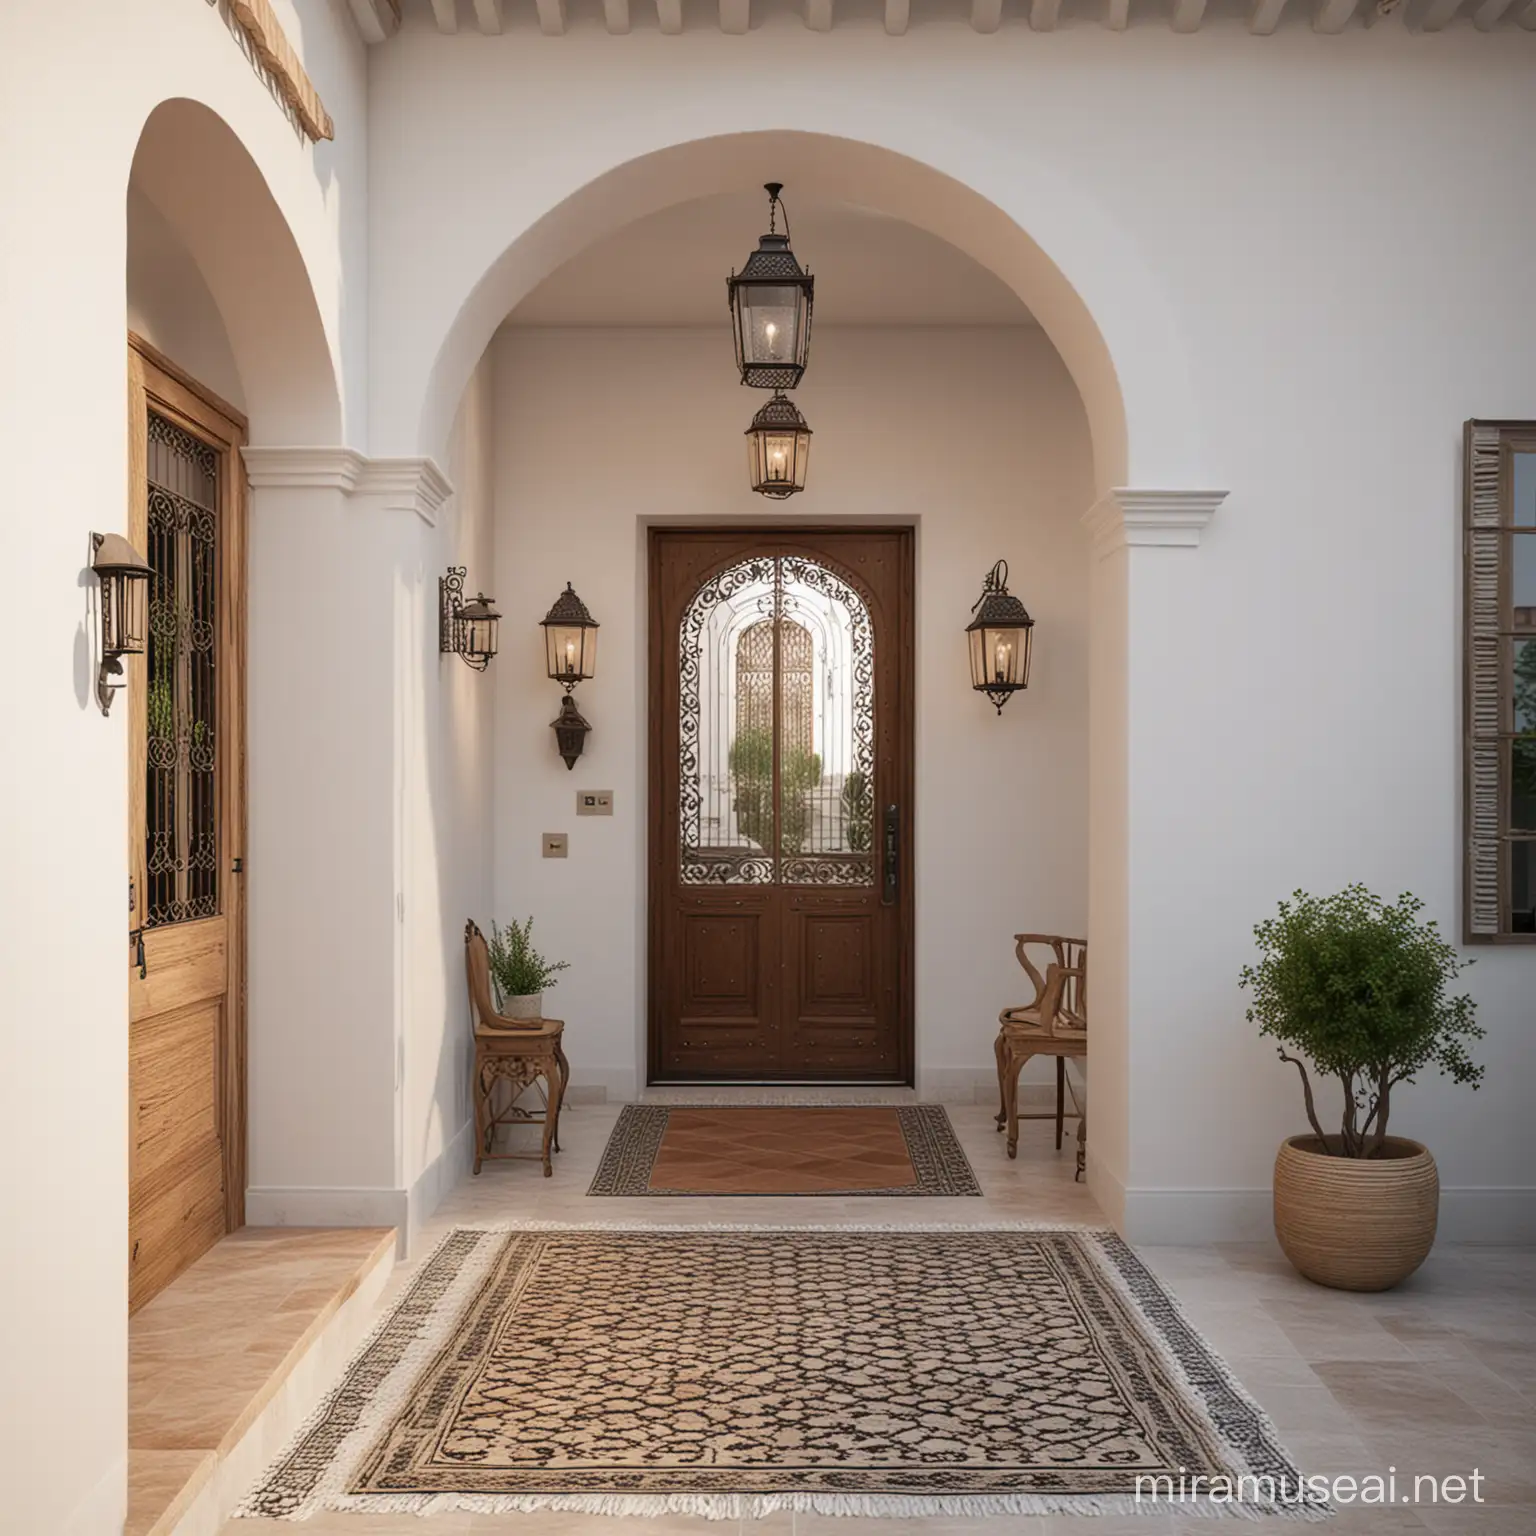 generate visualisation  of entrance to andalusian  house in modern interior style with traditional accents